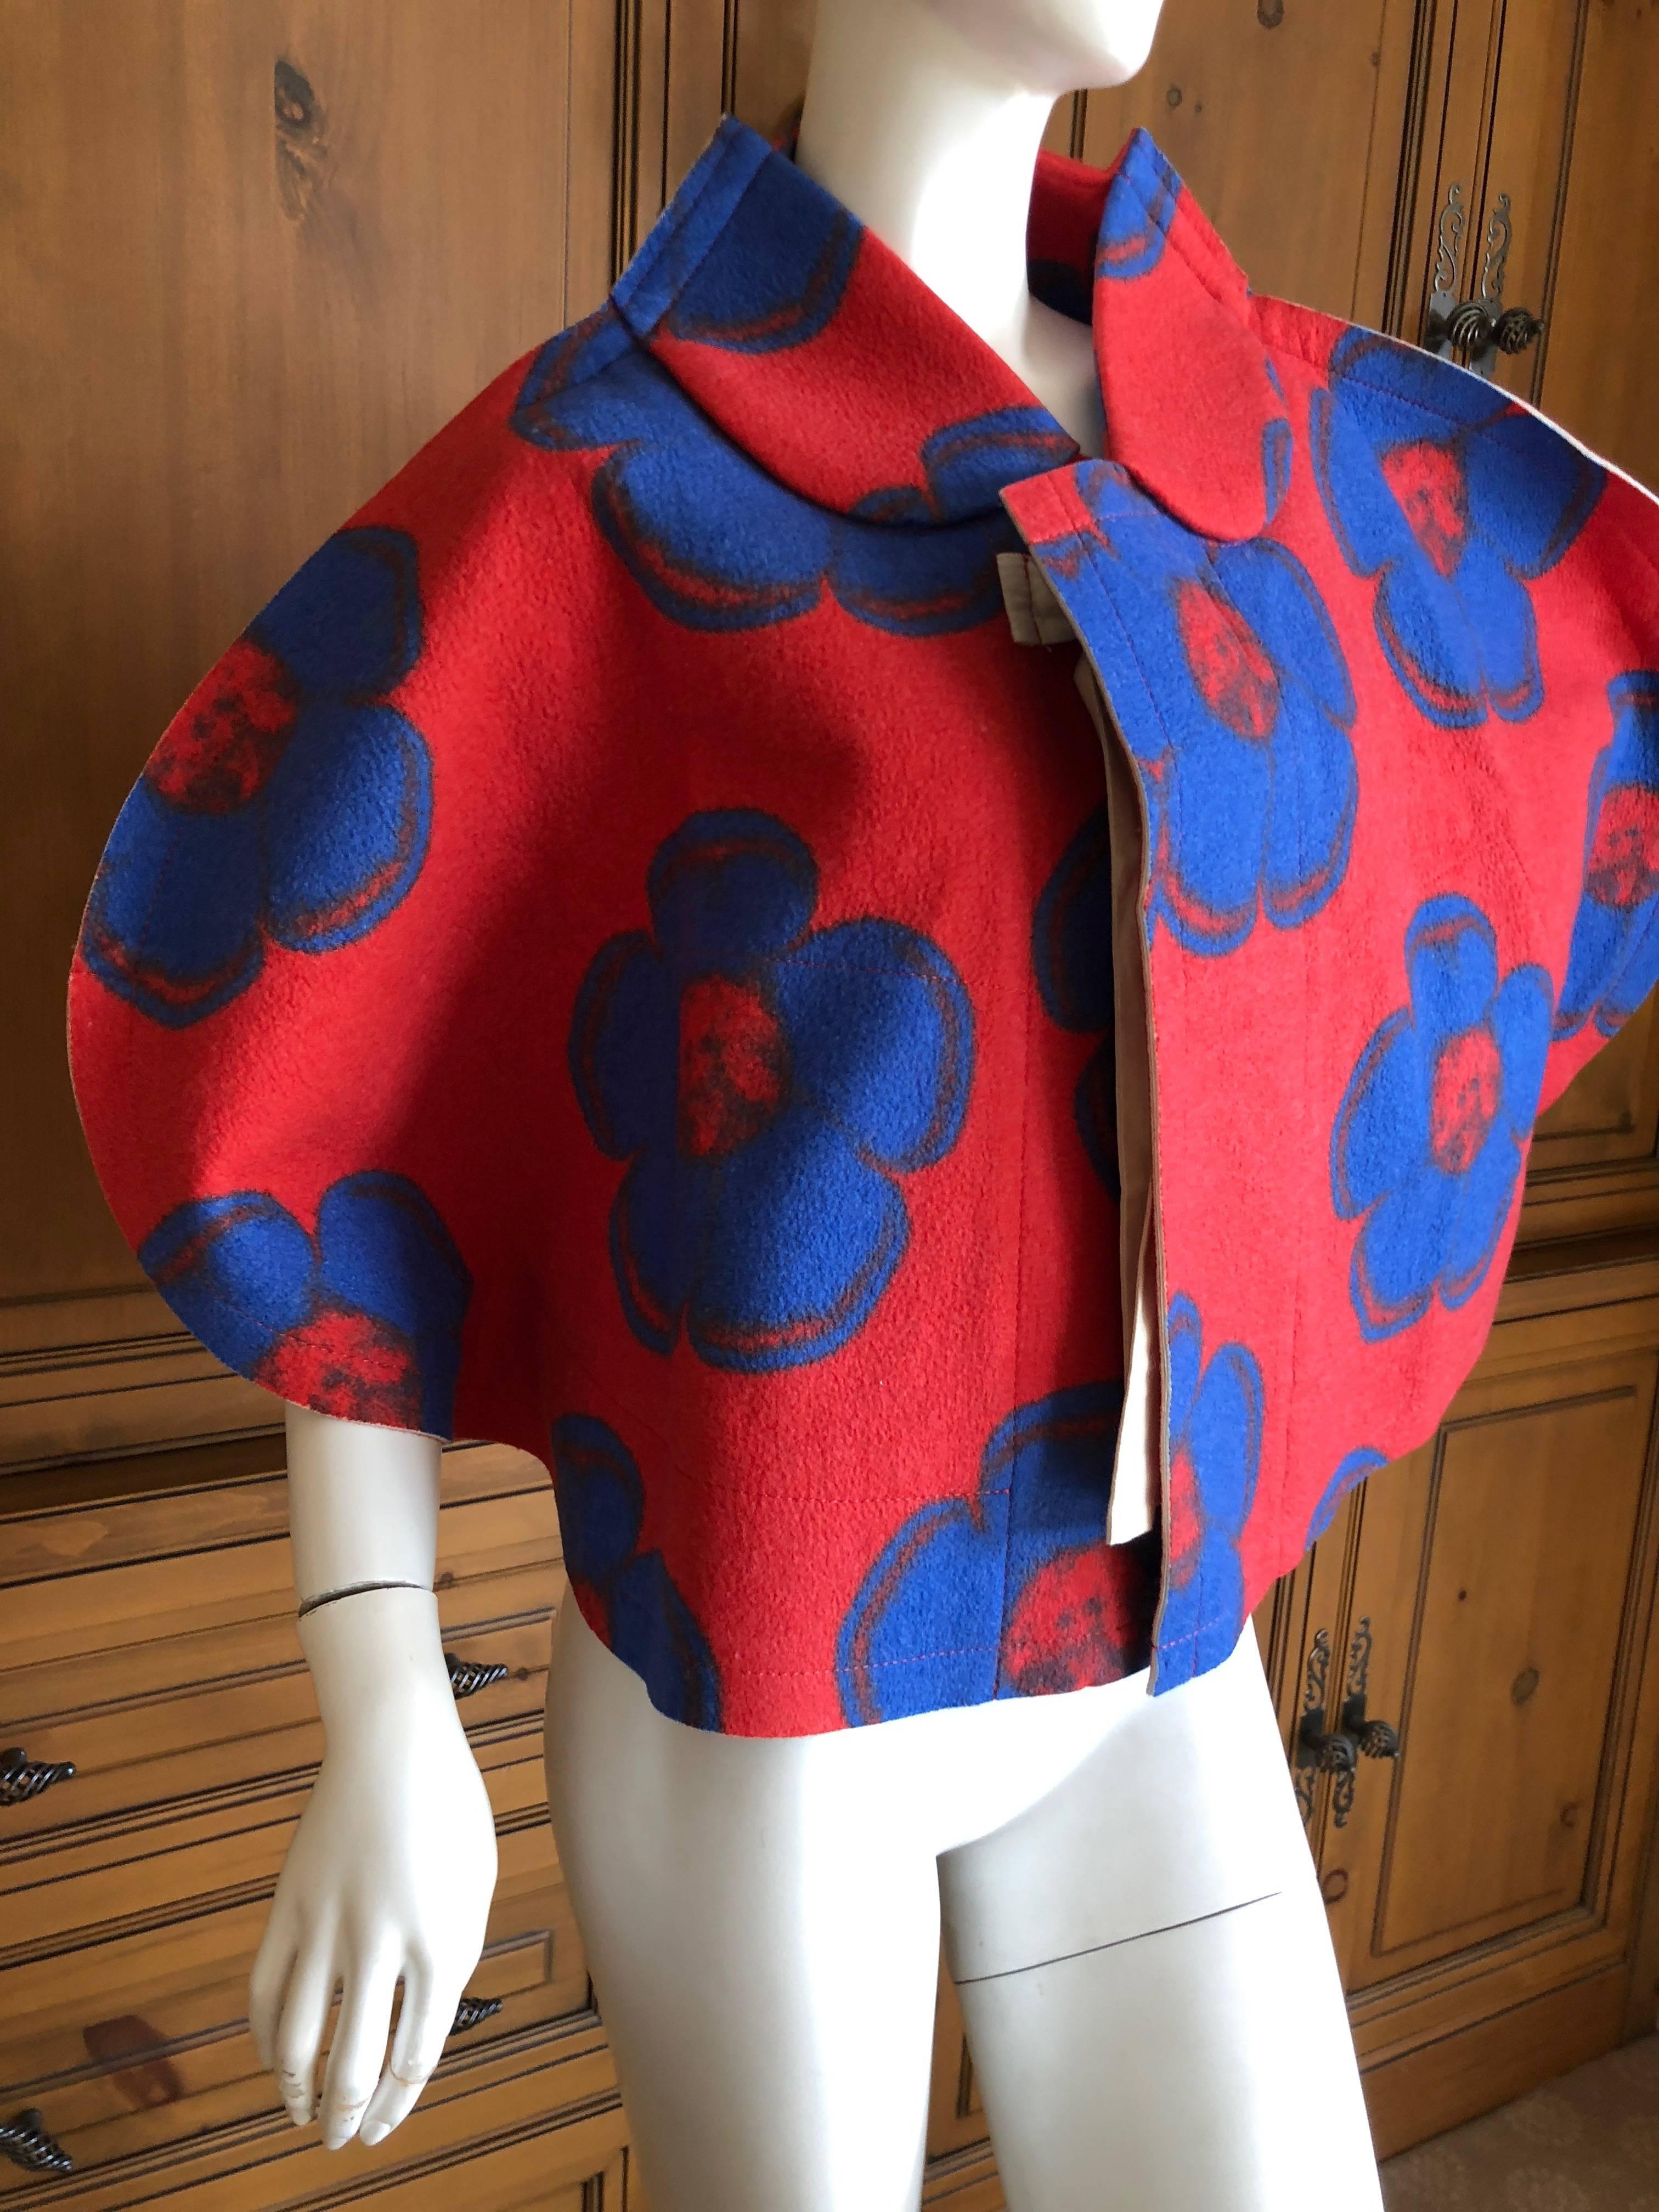 Comme des Garcons Fall 2012  Felted 2D Jacket.

Size S
24